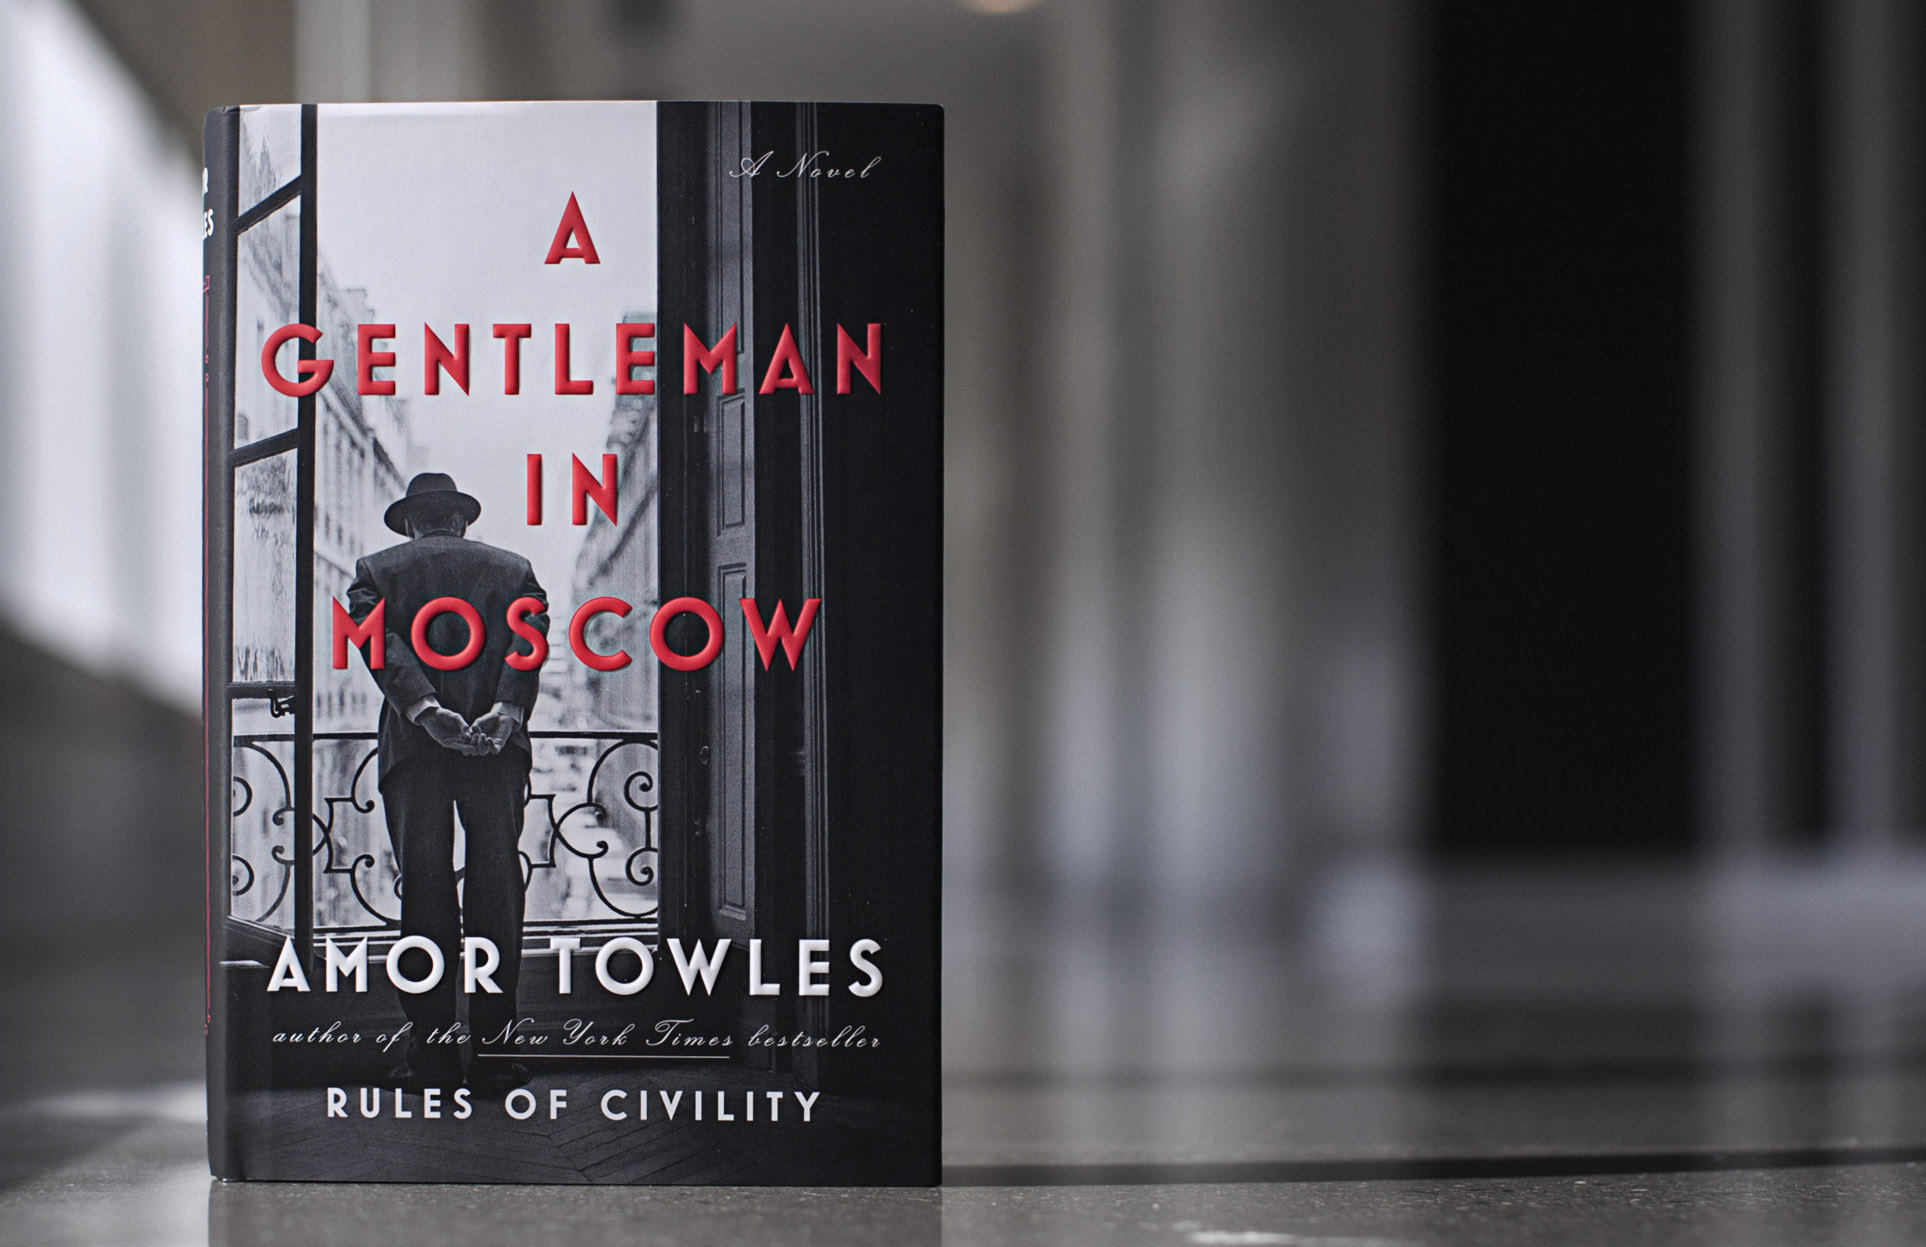 Book cover, a gentleman in Moscow